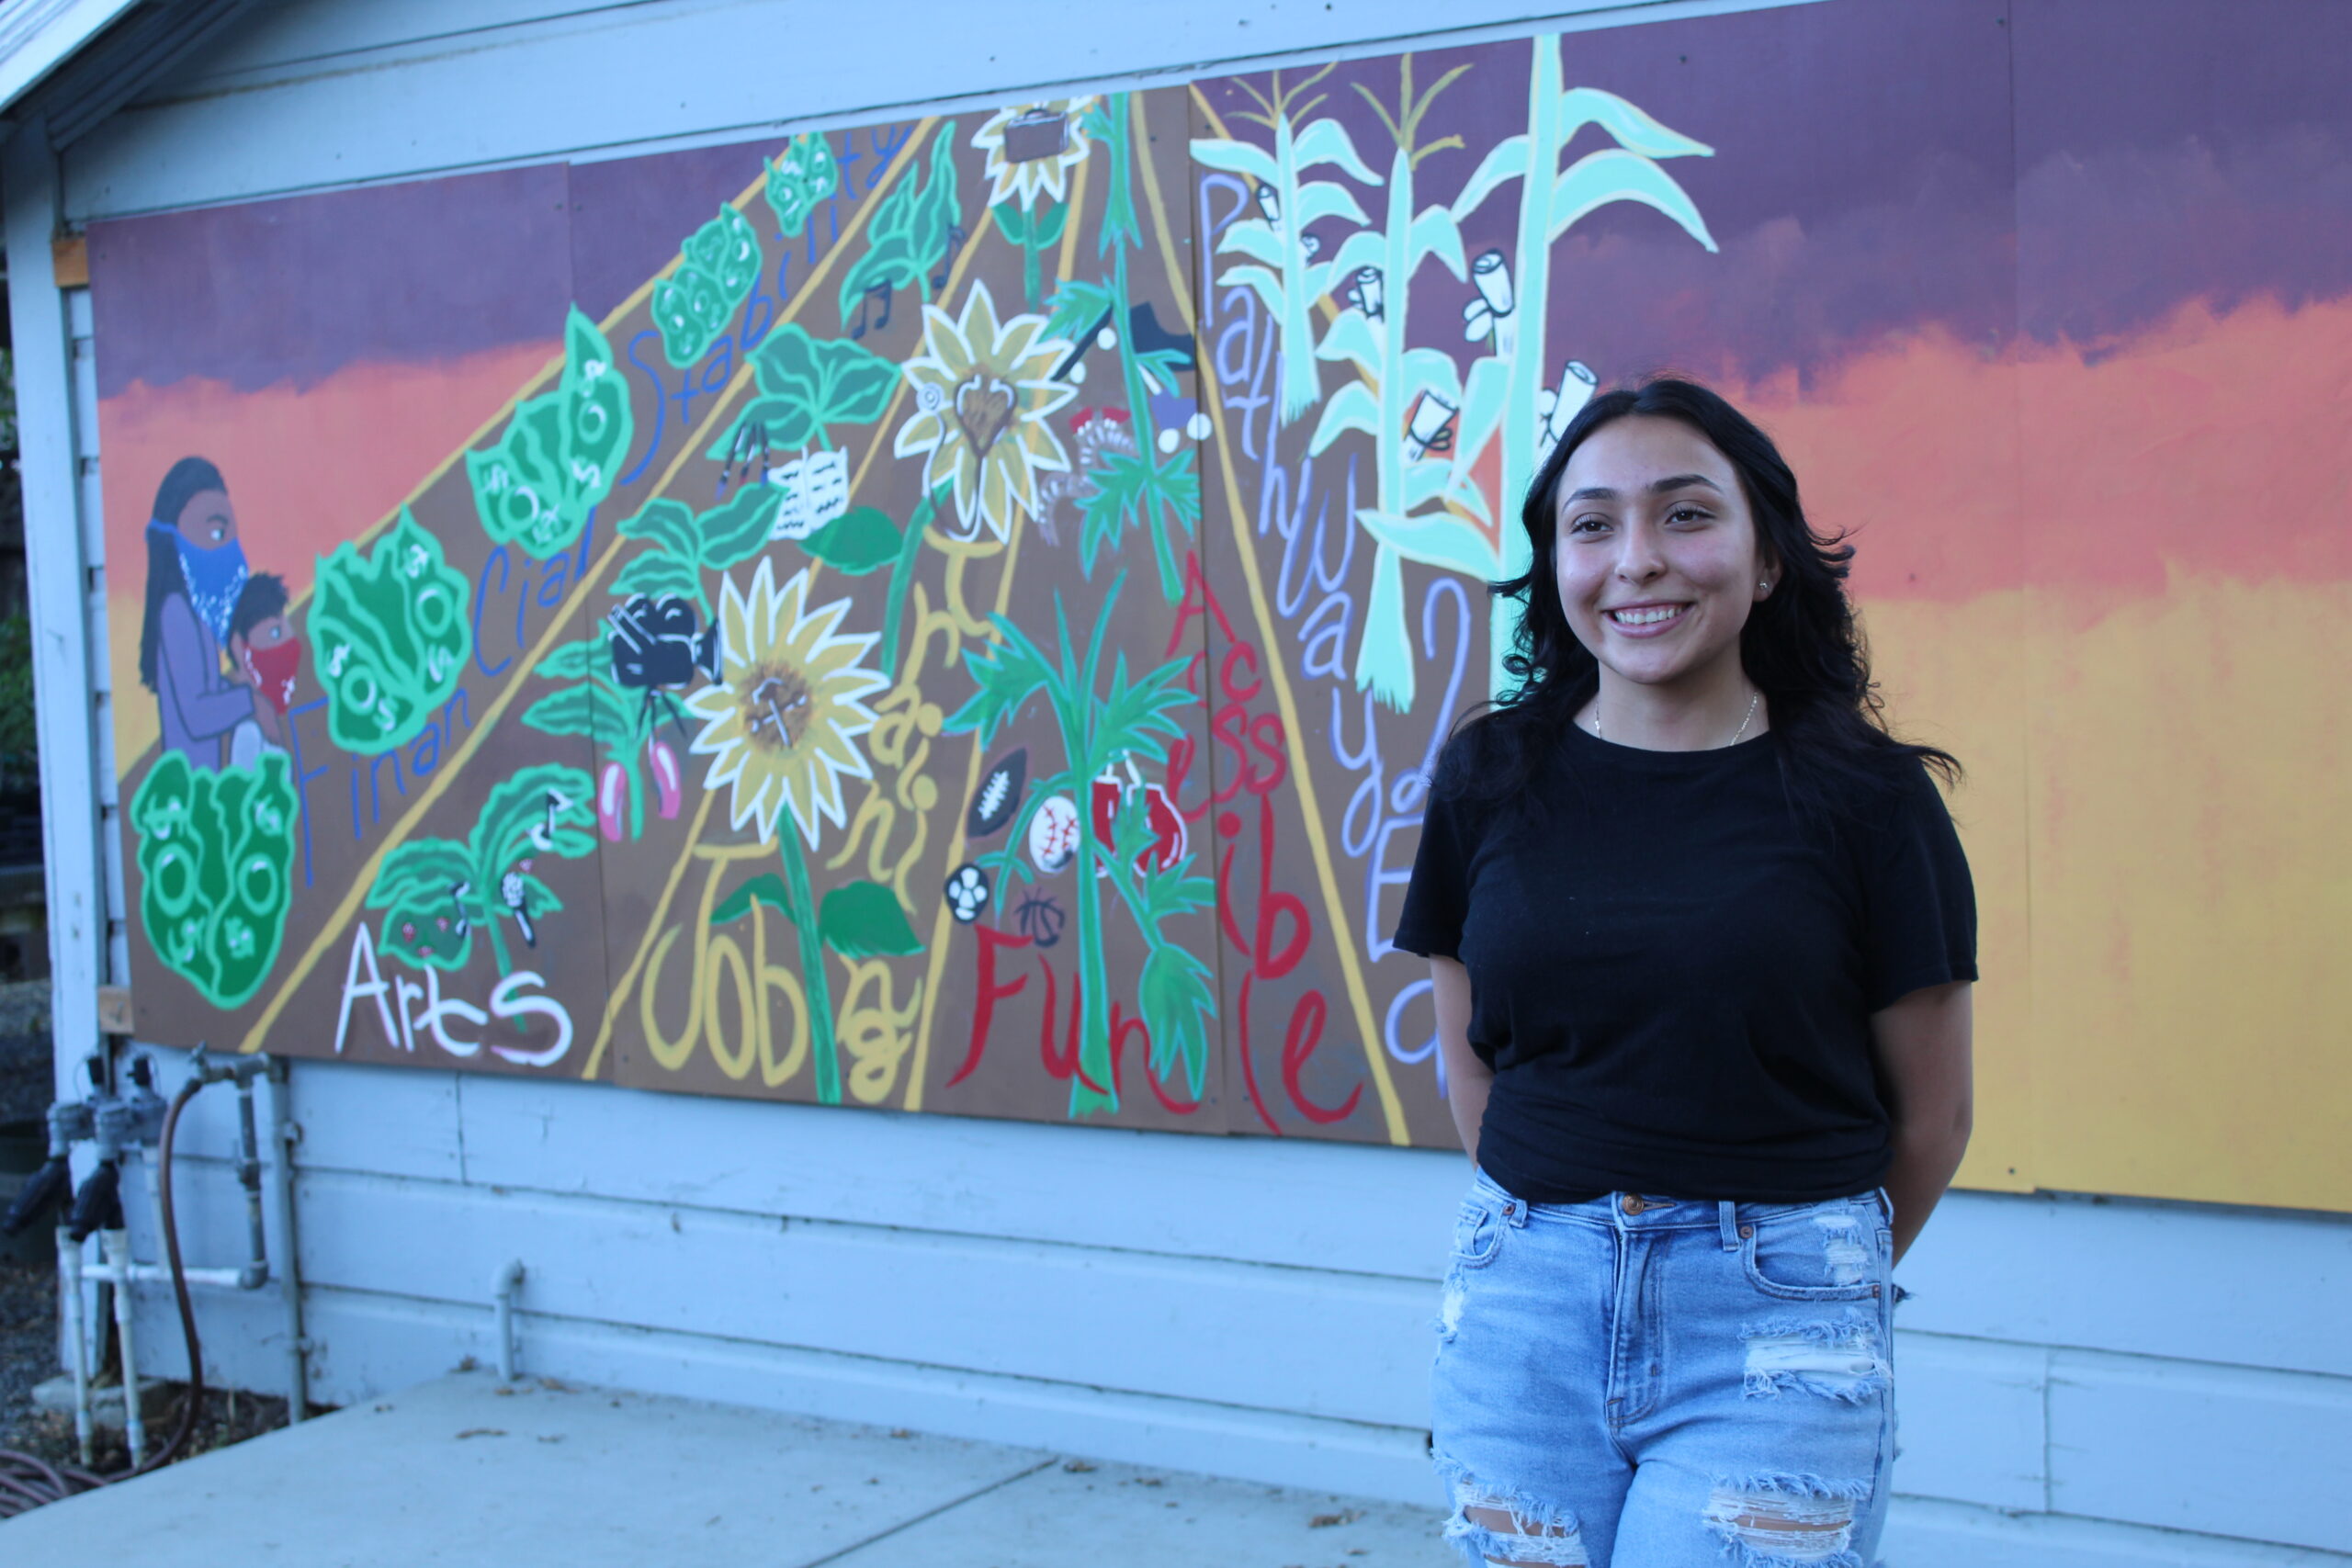 A Chance to Grow our Future, Tanya Rodriguez, Cesar Chavez Community School, 2021